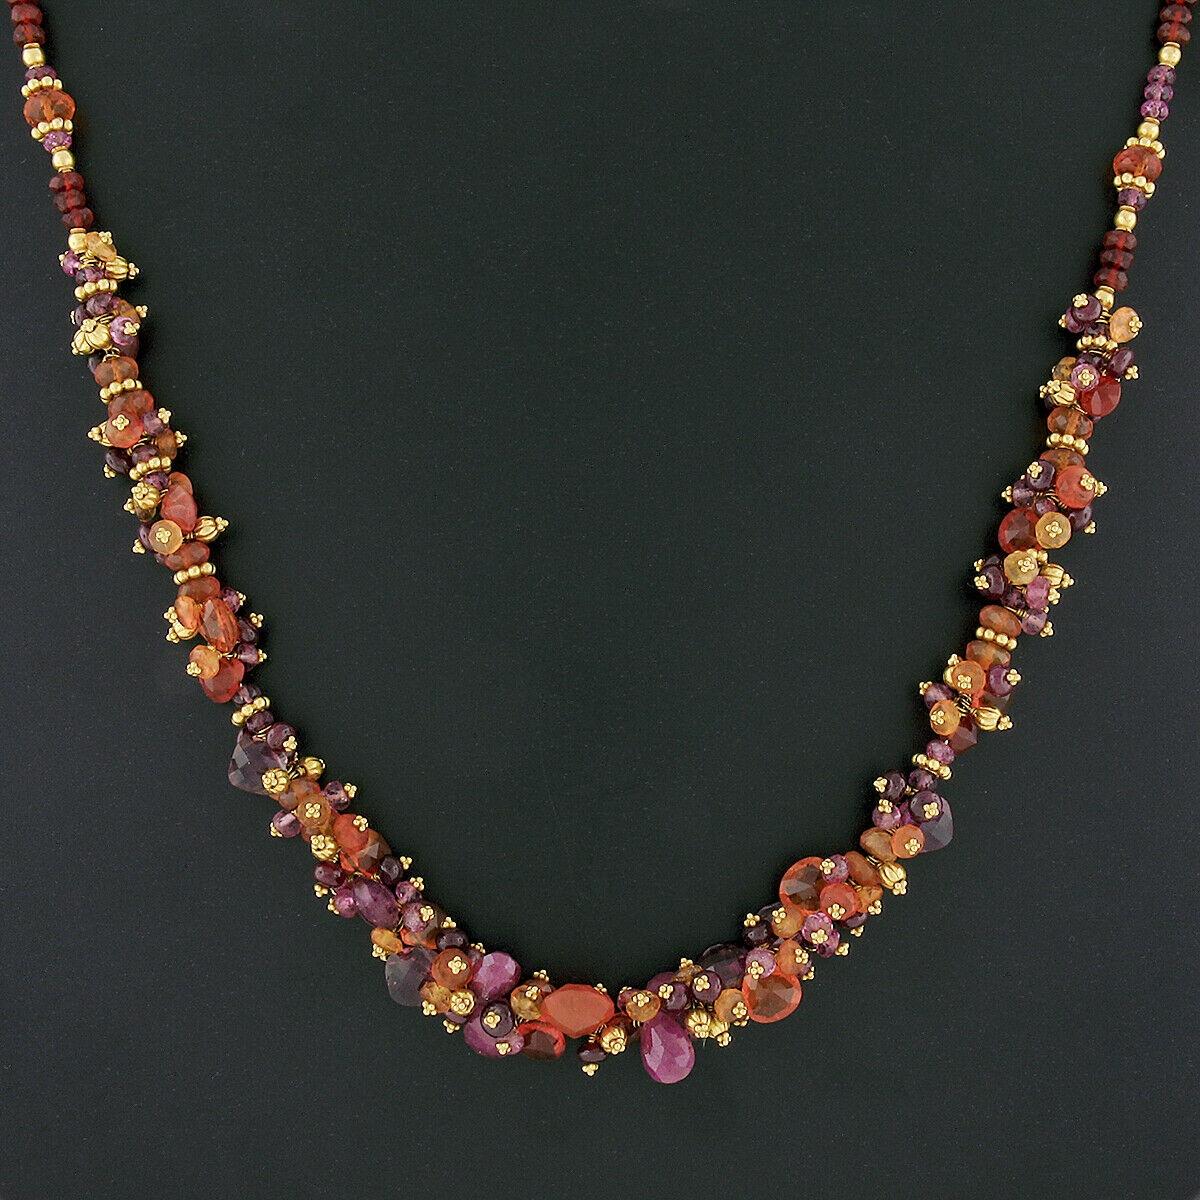 Here we have a beautiful beaded necklace by Laura Gibson, featuring numerous gemstones of different colors and shapes strung throughout. These colored stones are tear drop briolette shape, faceted round beads and checkerboard cushion cut. They offer